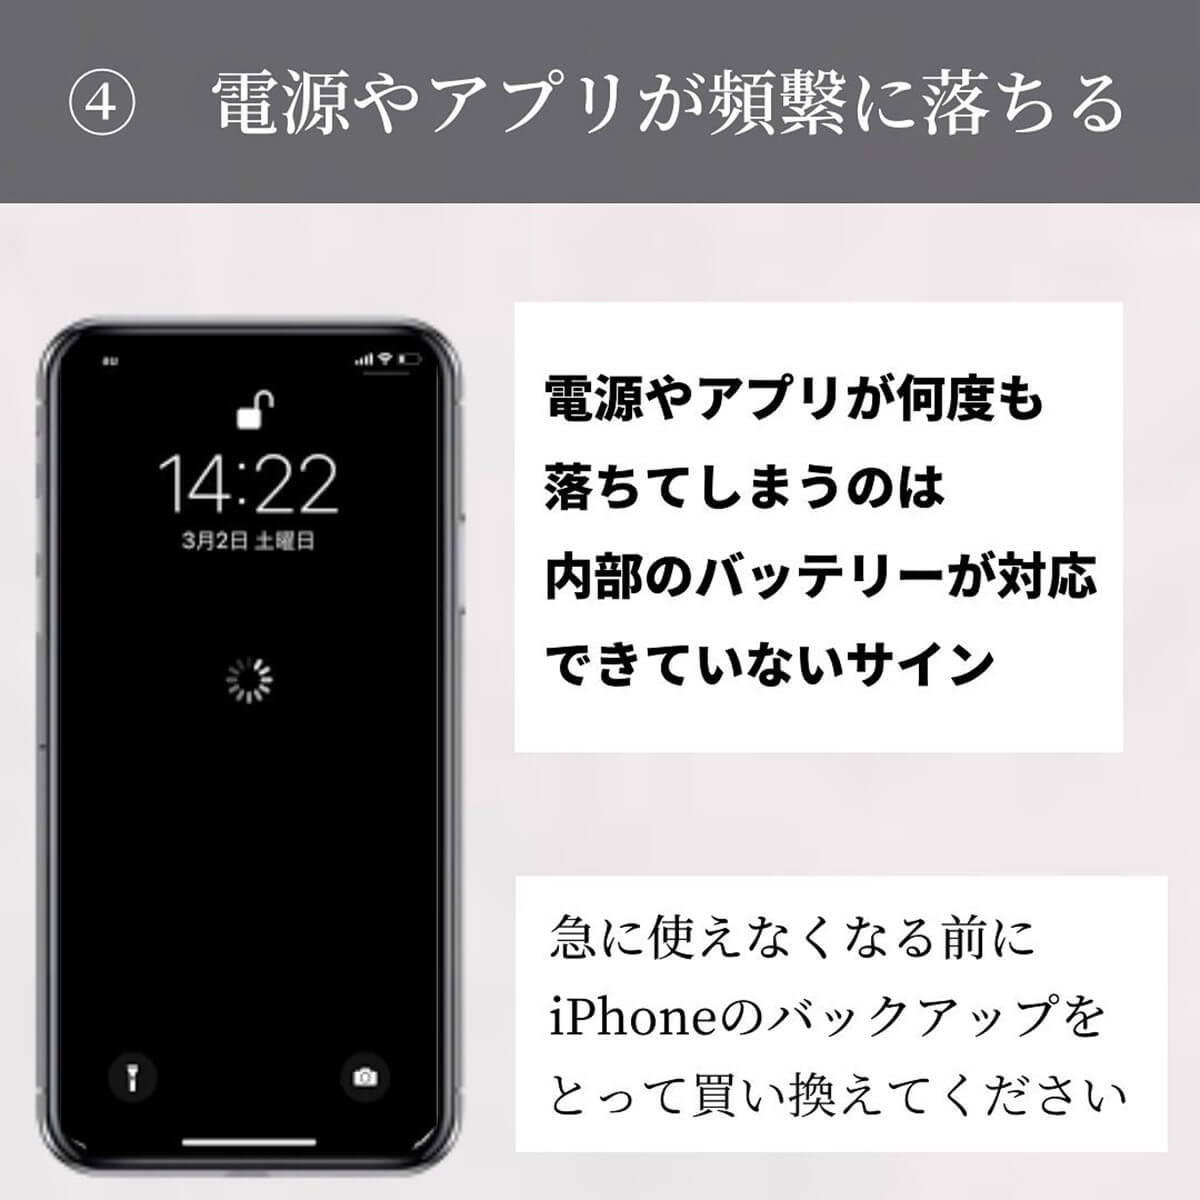 iPhoneの買い替え時を確認する方法4